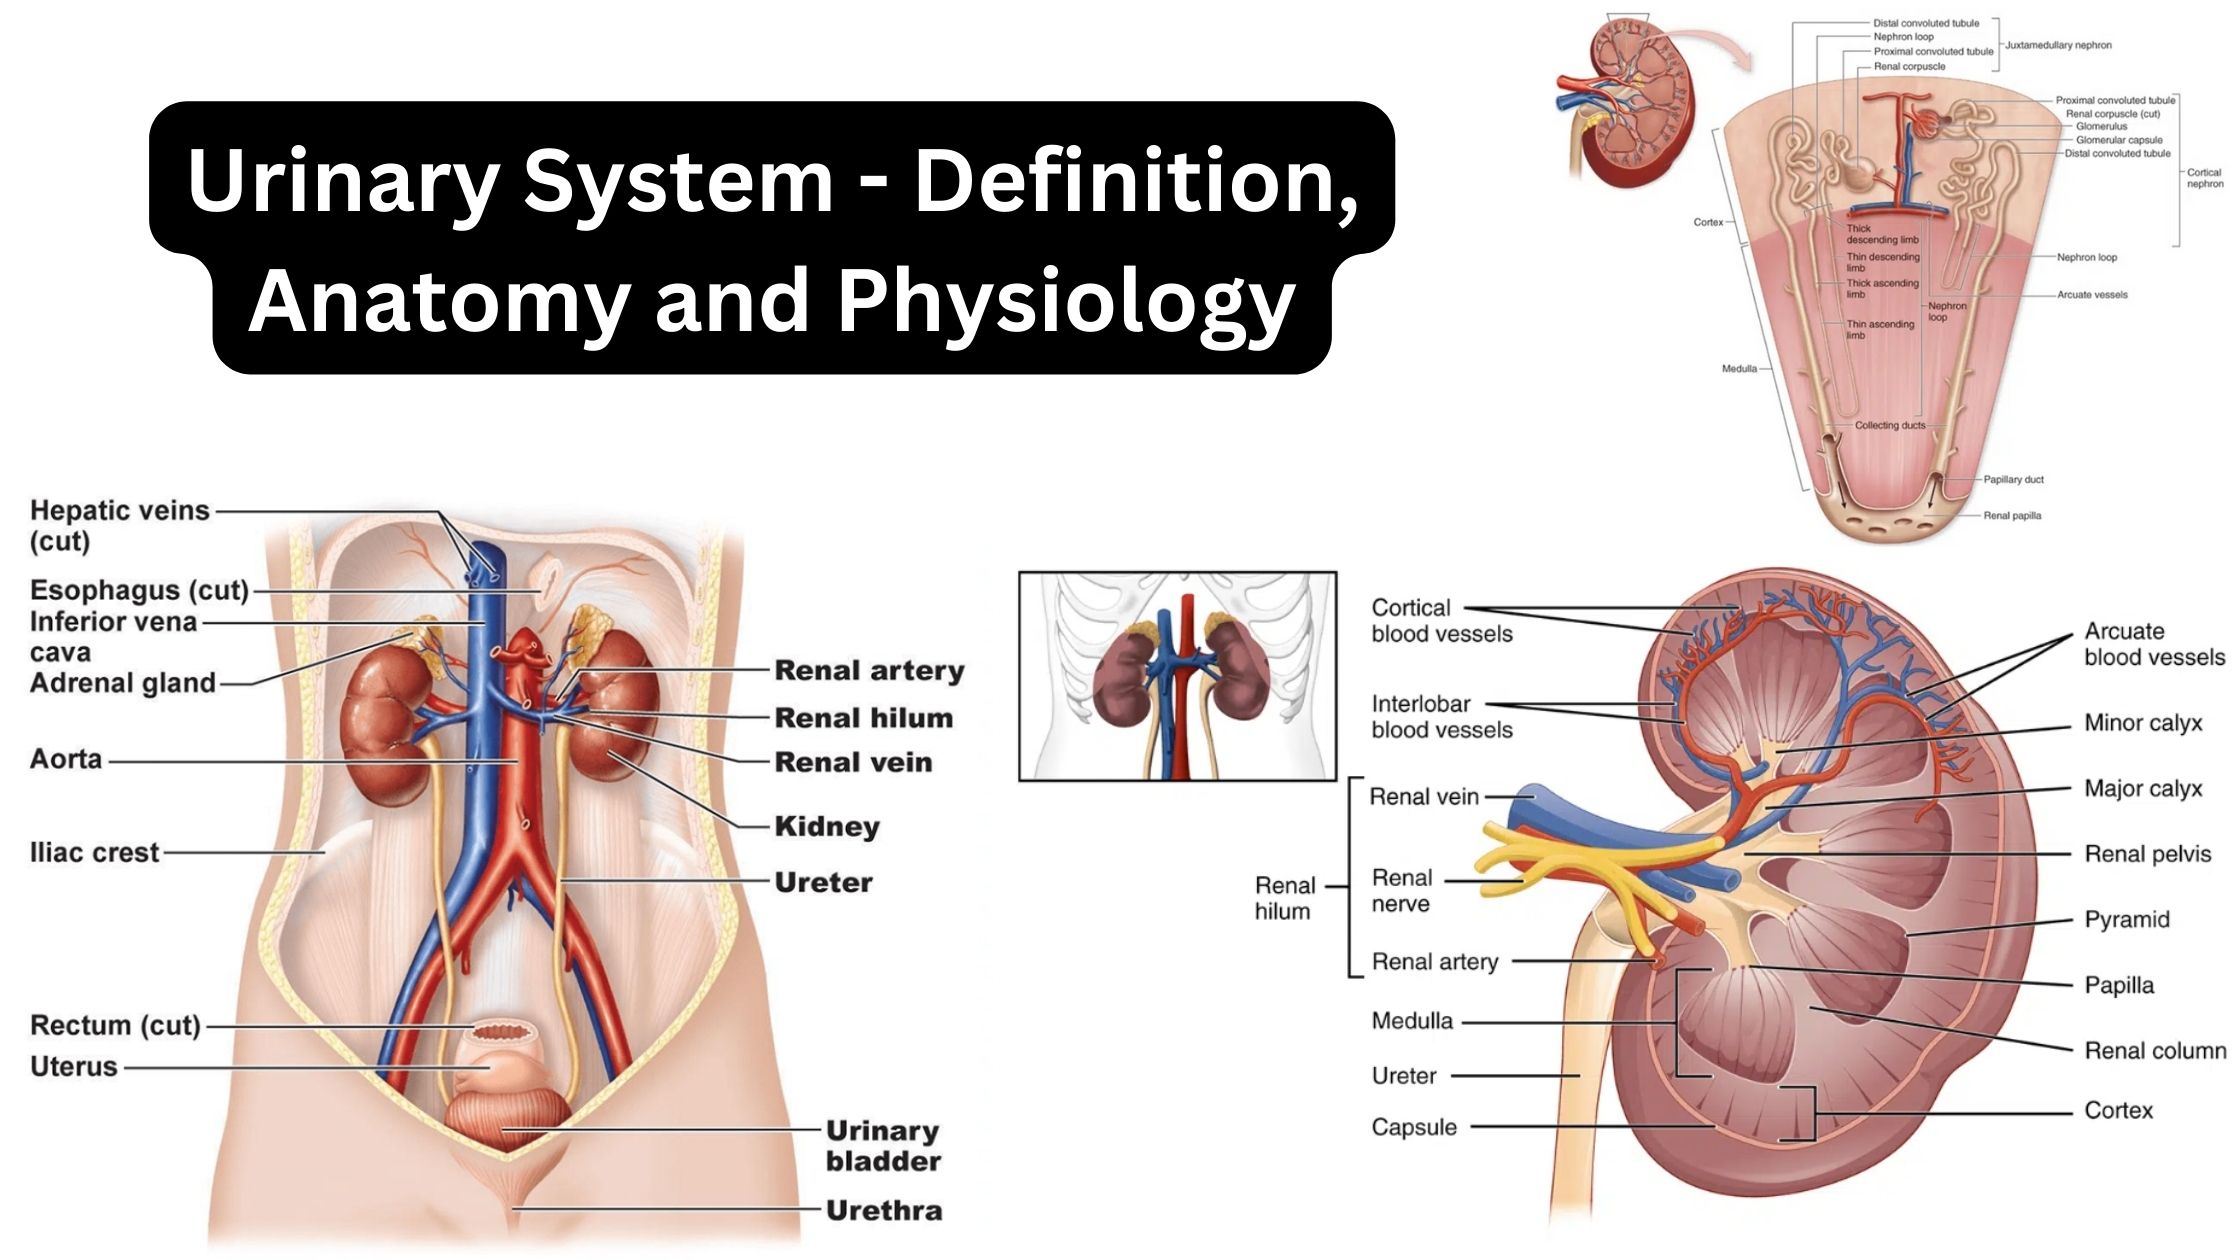 Urinary System - Definition, Anatomy and Physiology